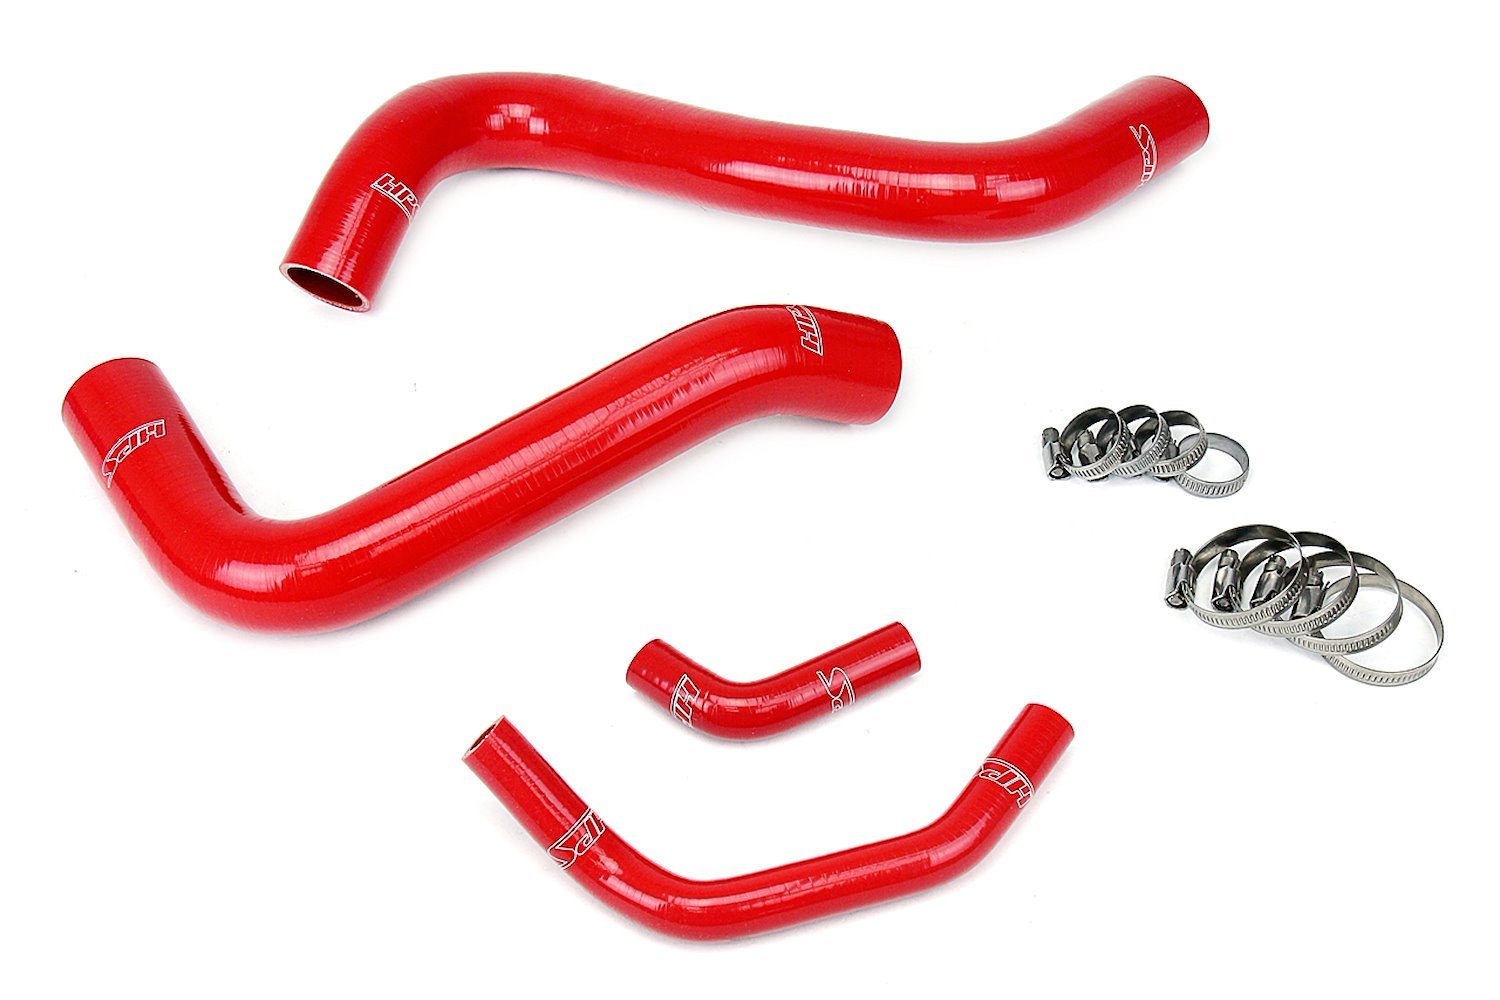 57-1467R-RED Radiator Hose Kit, High-Temp 3-Ply Reinforced Silicone, Replace OEM Rubber Radiator Coolant Hoses